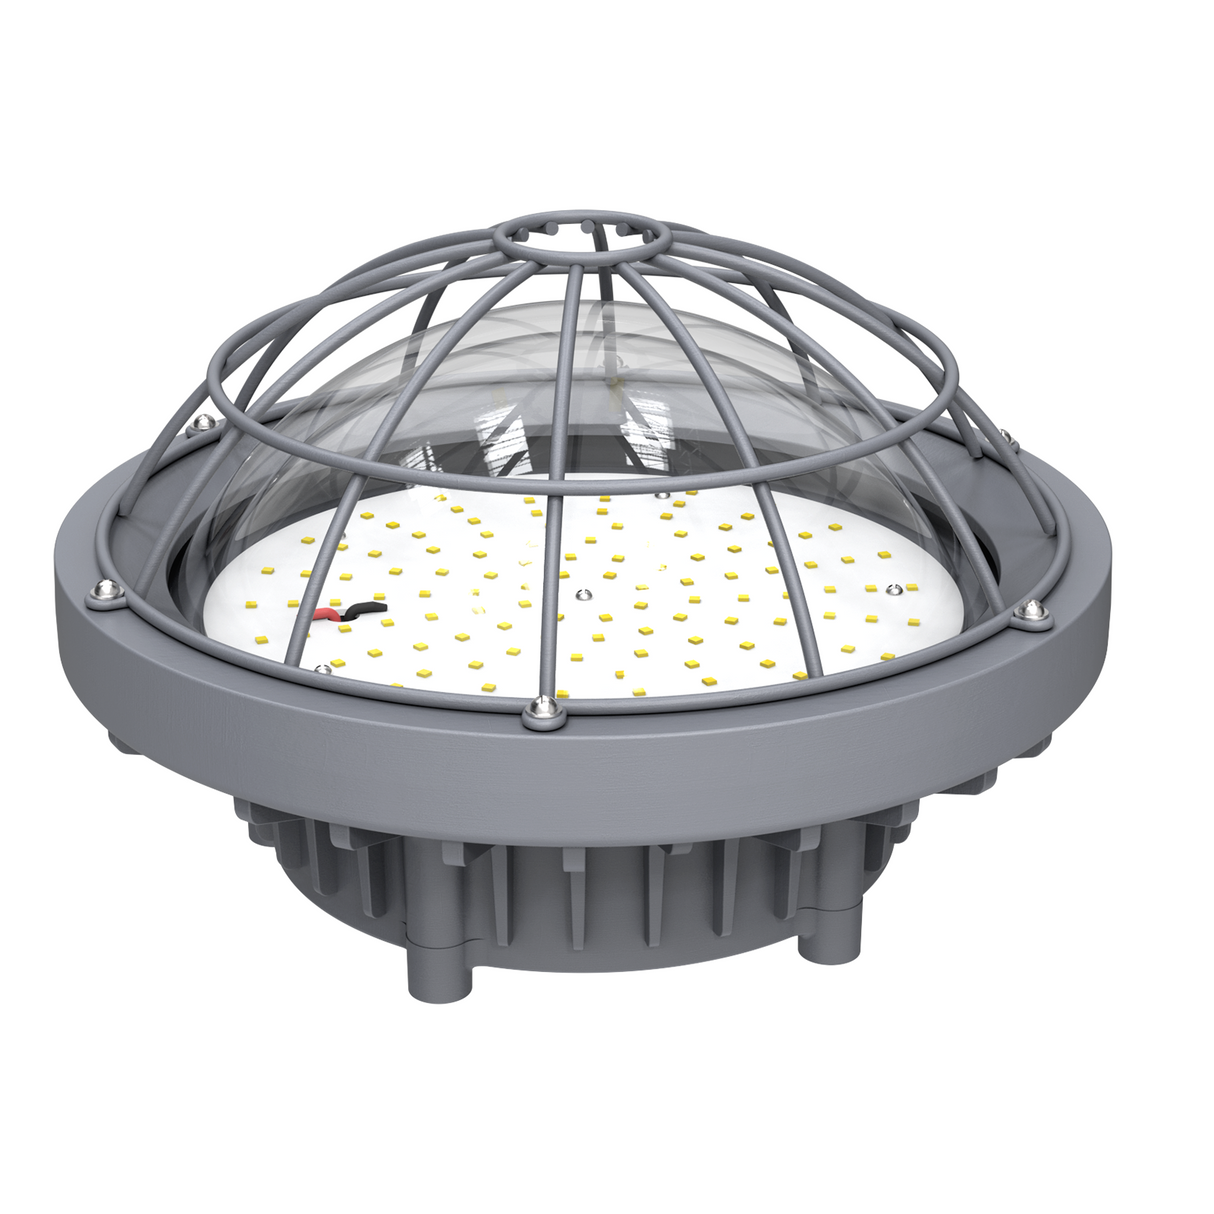 80W Round Explosion-proof Low Bay Light Class 1 Division 2 CCT 5000K | CEB-80W-120V-50K